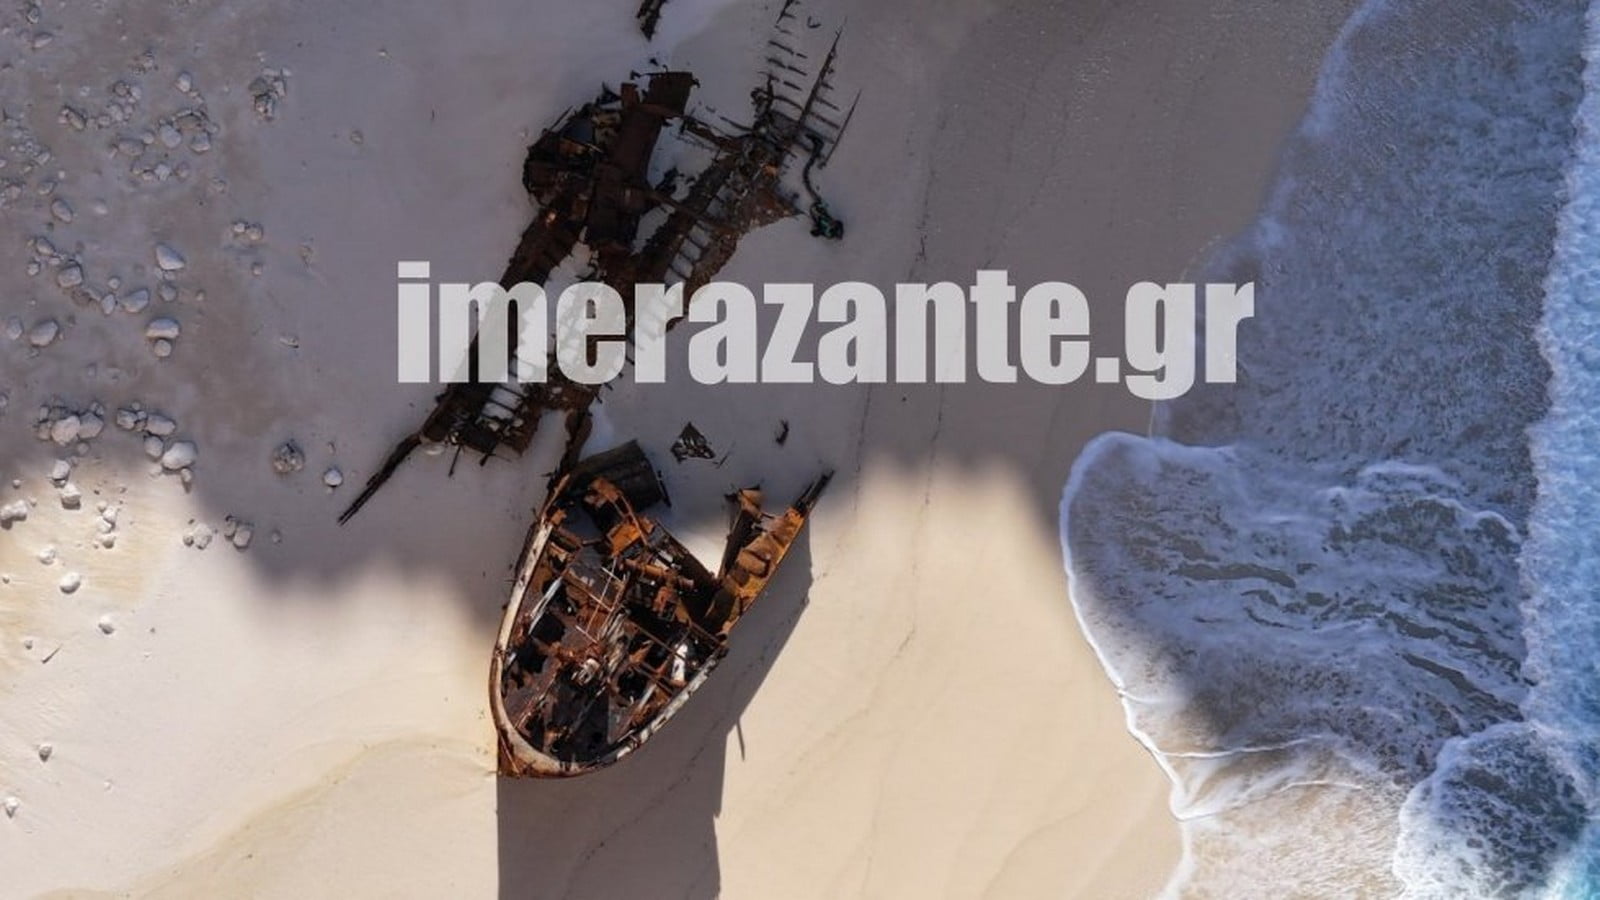  Close up drone image from Shipwreck beach in Zakynthos after the recent storm. Missing Parts